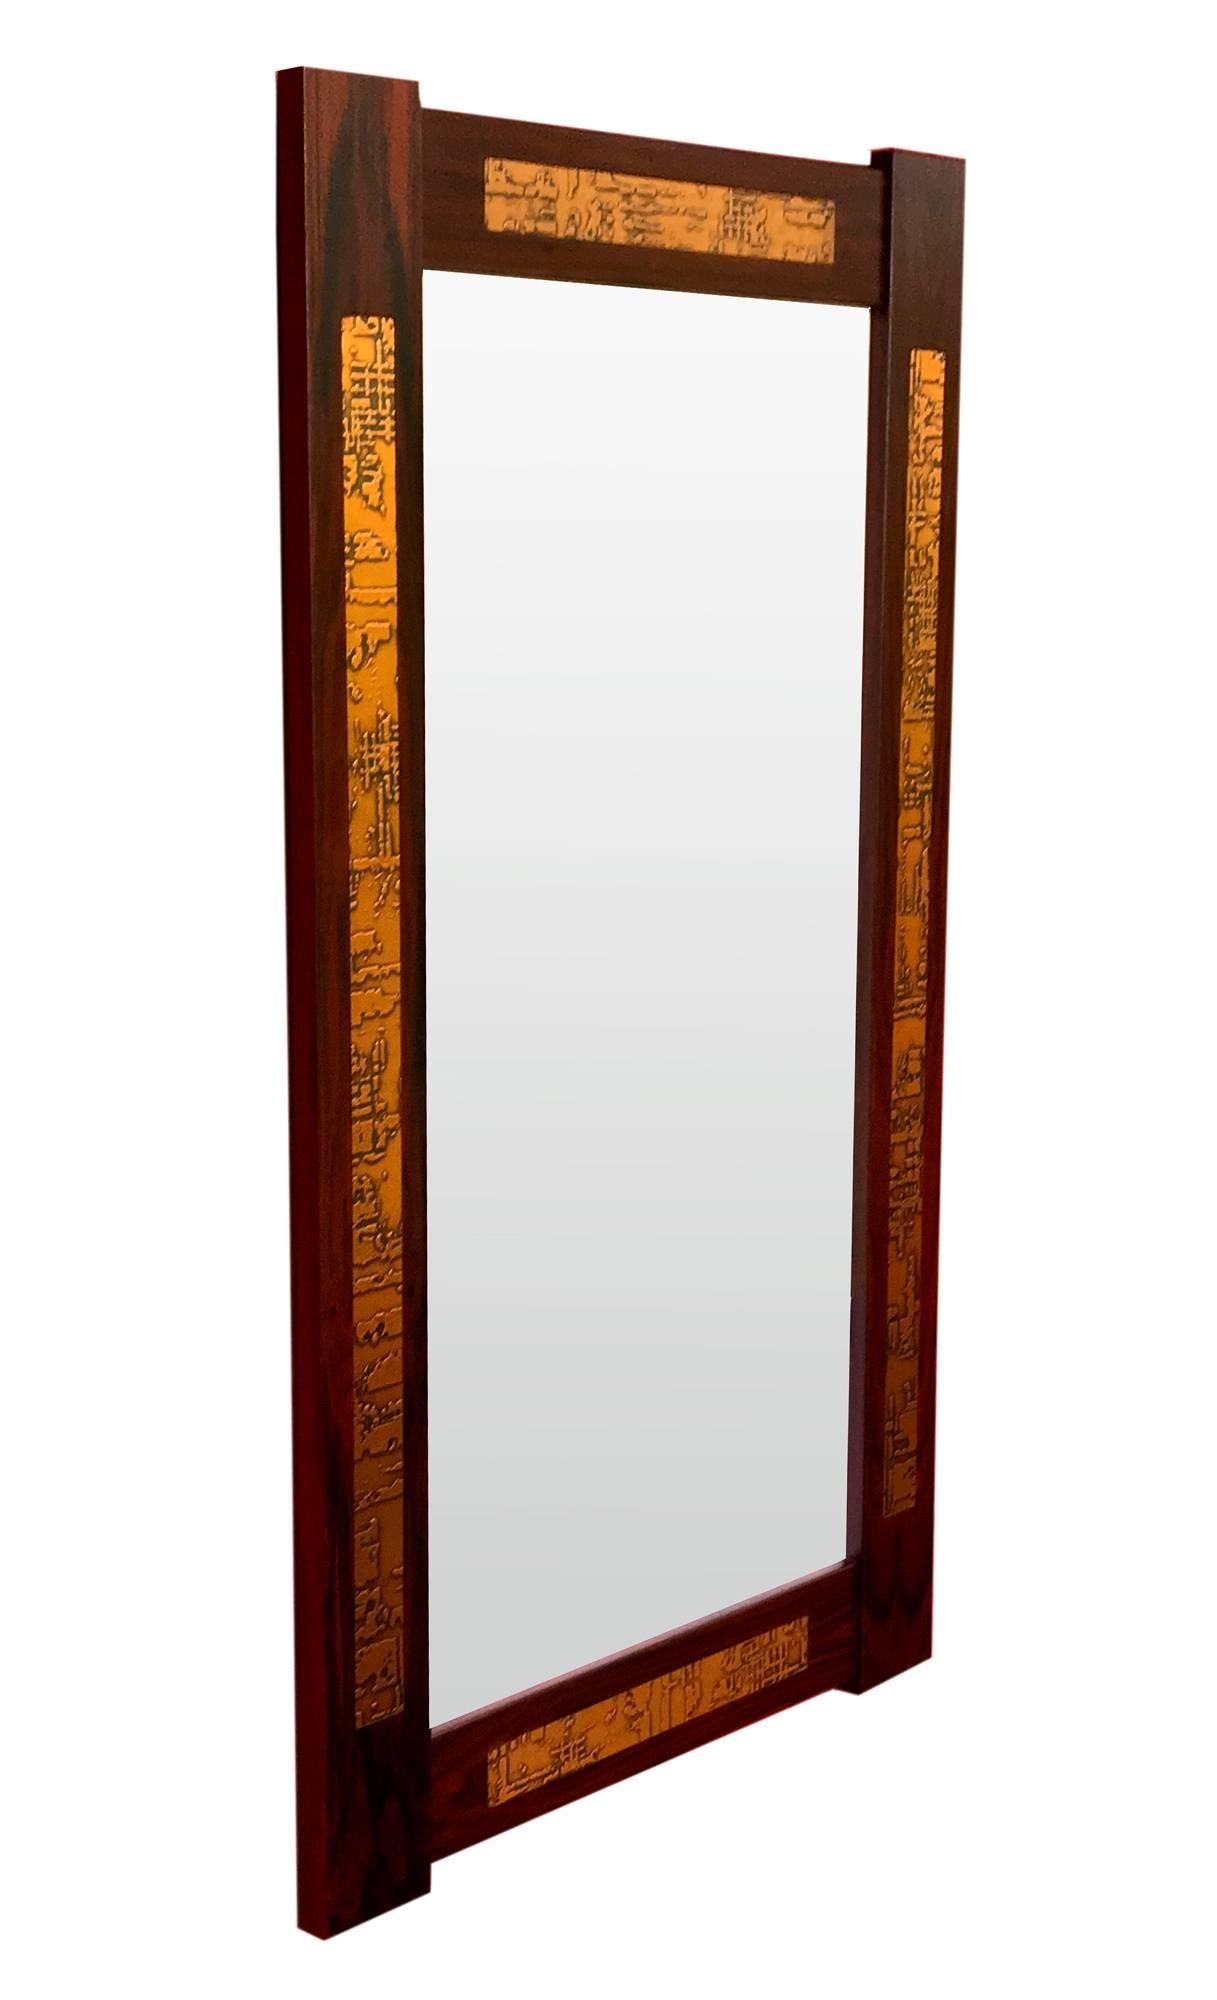 A beautifully crafted 1960s vintage mirror from Pedersen and Hansen. The teak frame has a rich reddish hue and is accented with acid-etched copper inlays in relief. Each inlay has a unique, random pattern.
In excellent vintage condition with minor